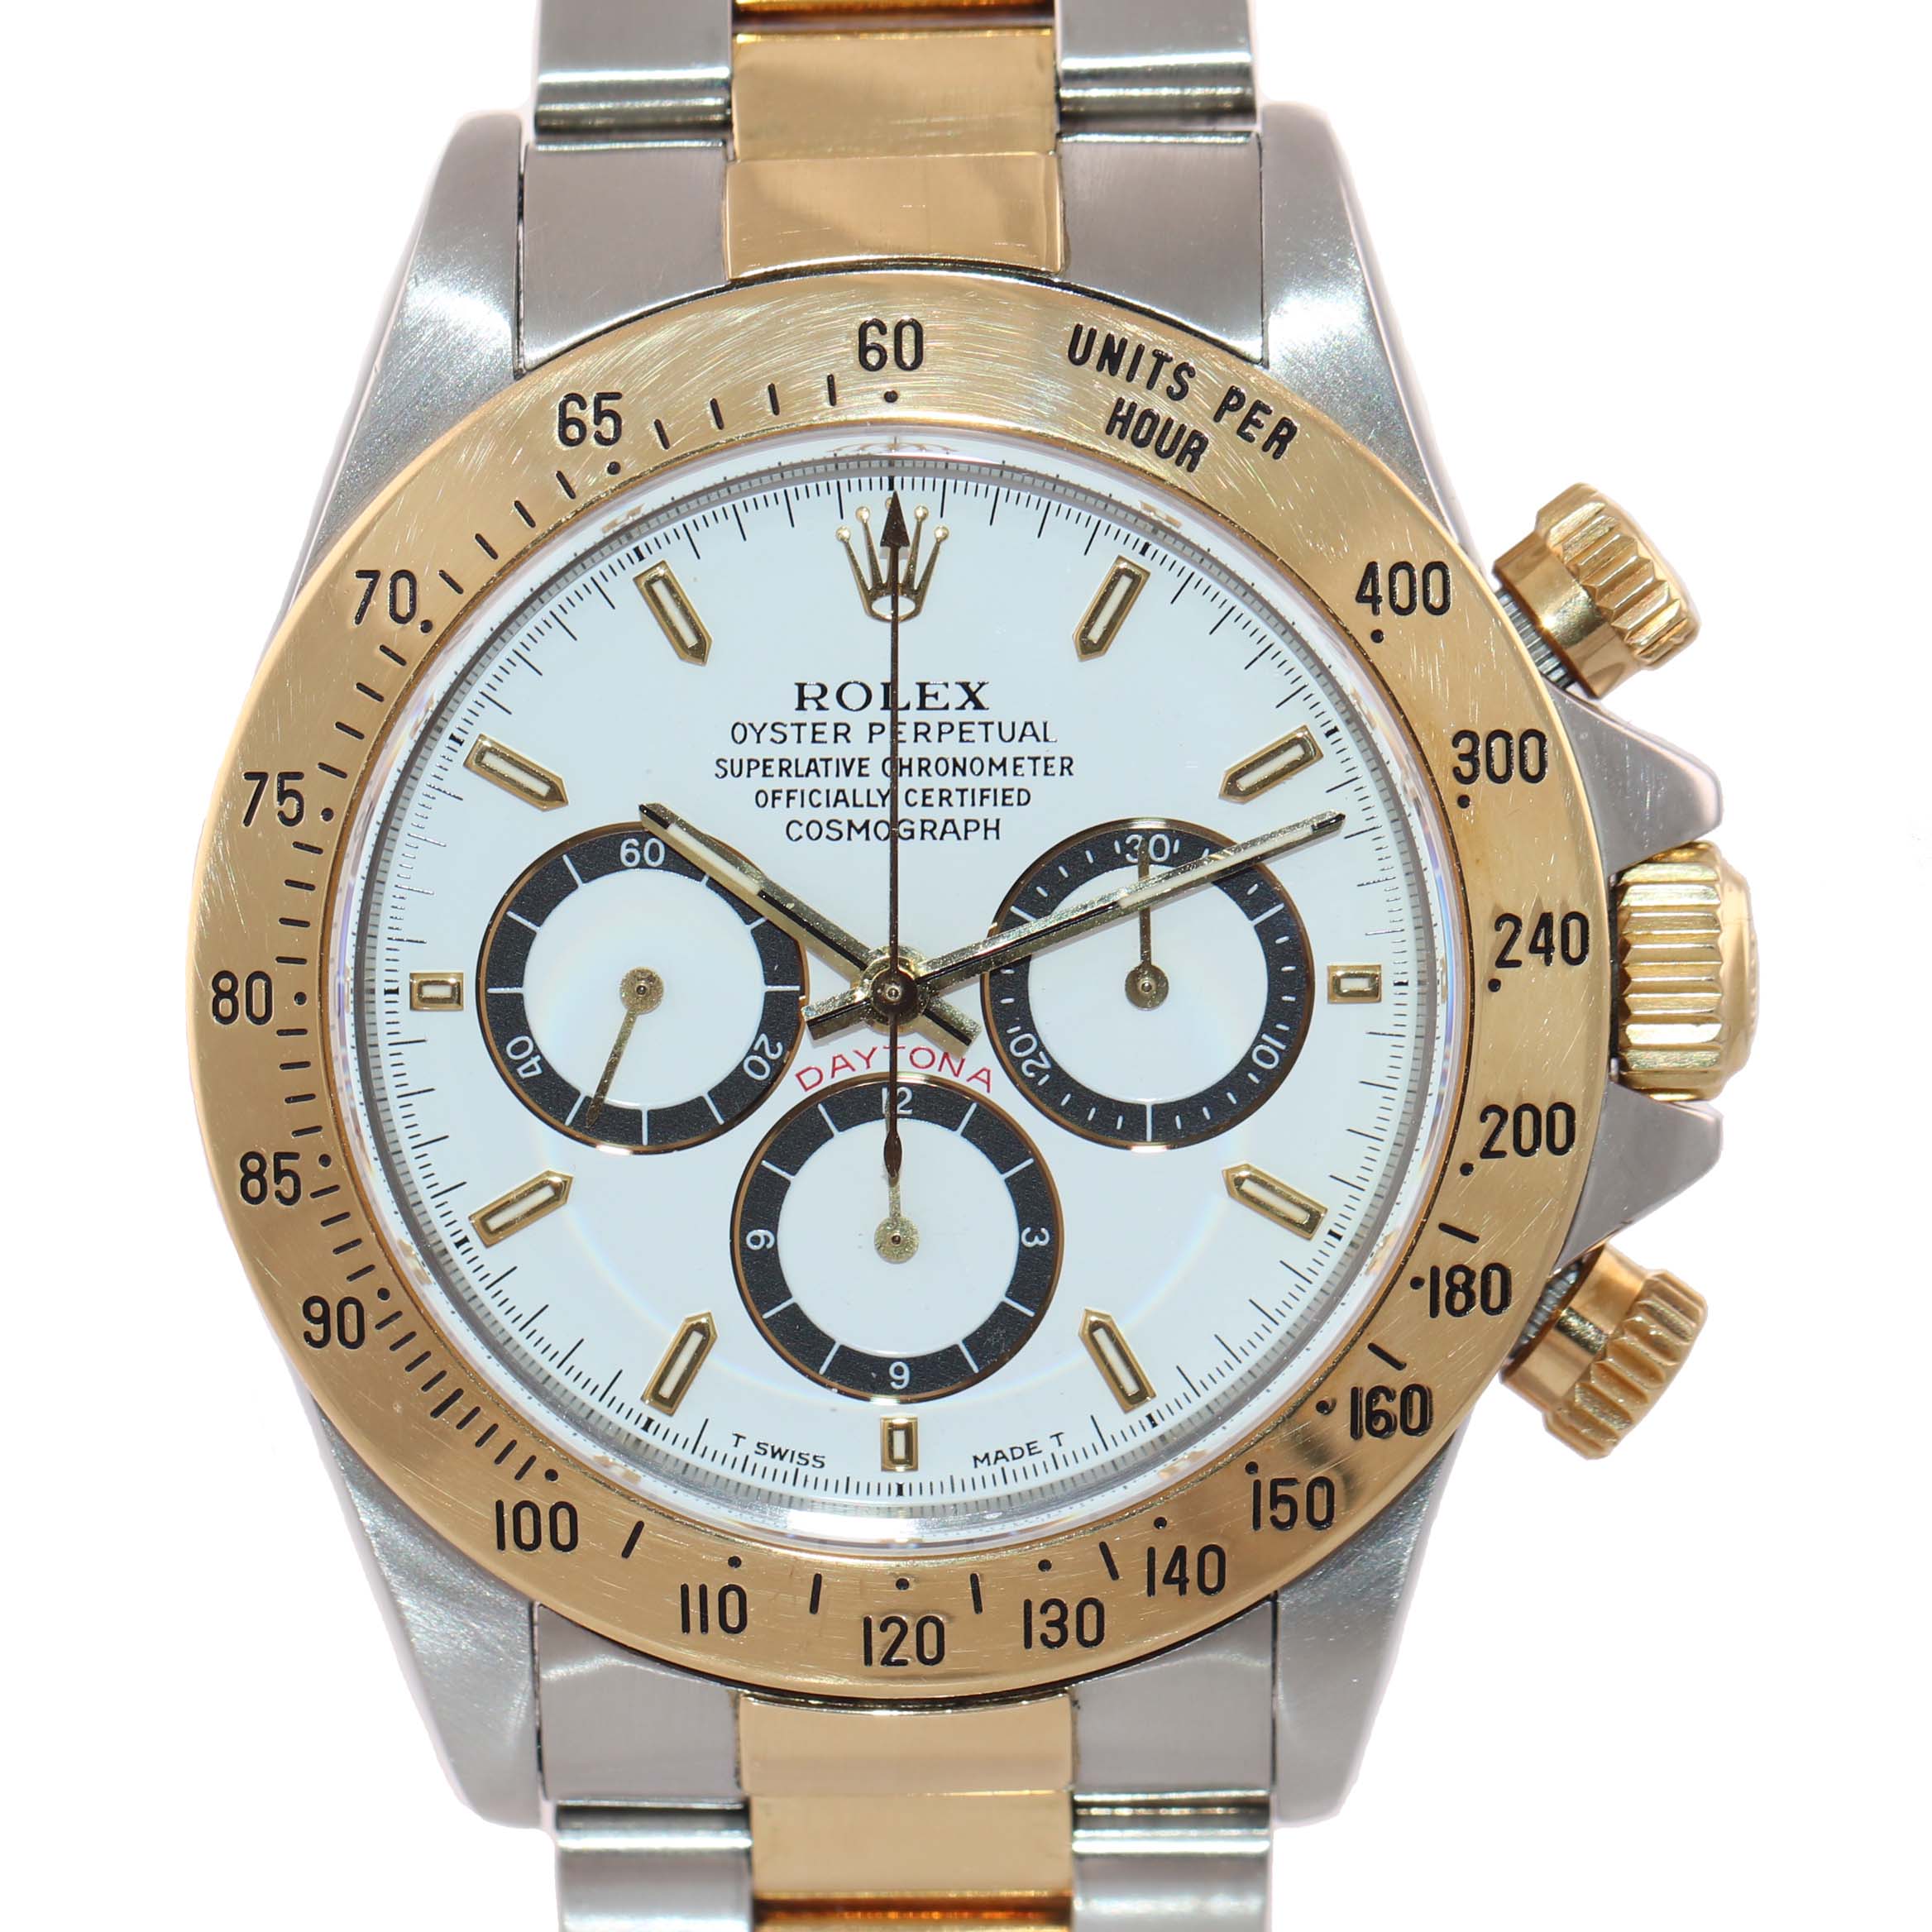 Papers Rolex Daytona Inverted 6 16523 Zenith White Dial 18k Gold Watch Box